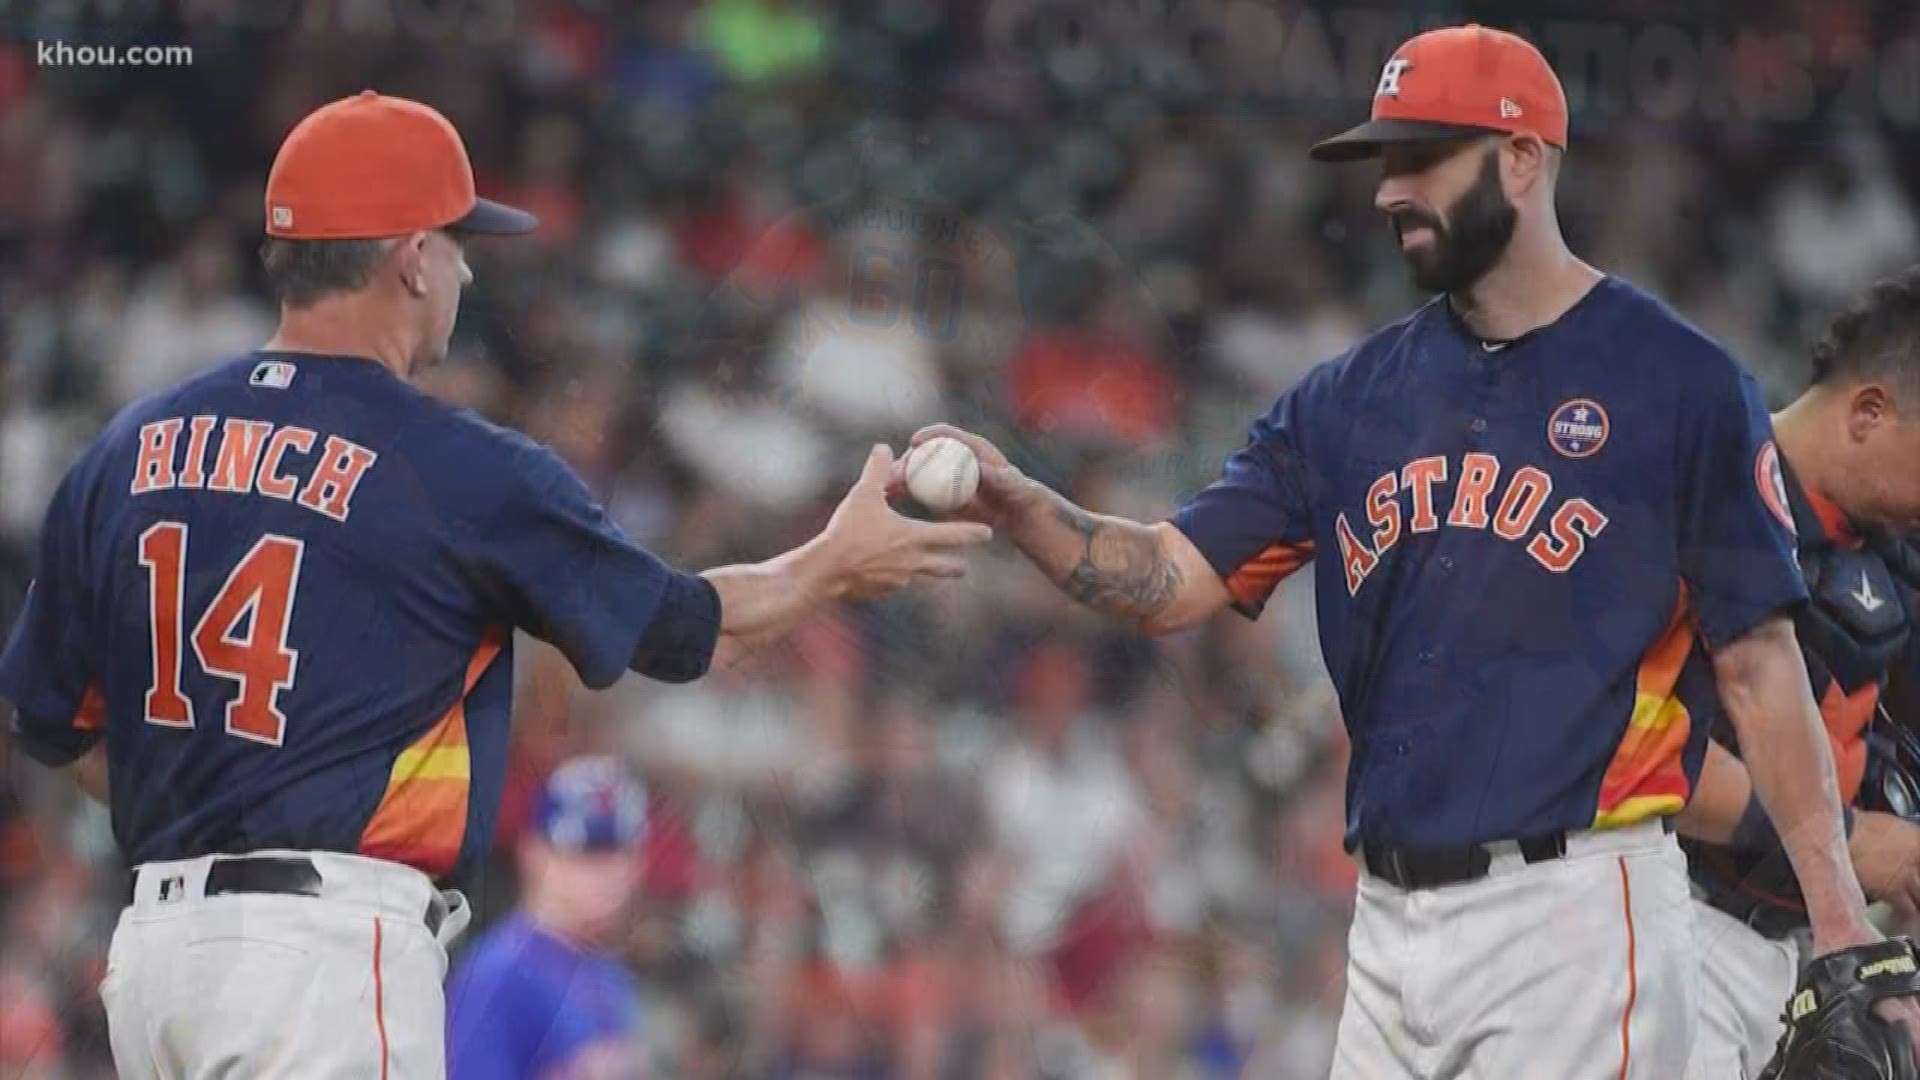 The Astros' sign-stealing scandal hands the ball to parents to deliver a pitch to children about cheating. Here's how to talk to kids about the topic.